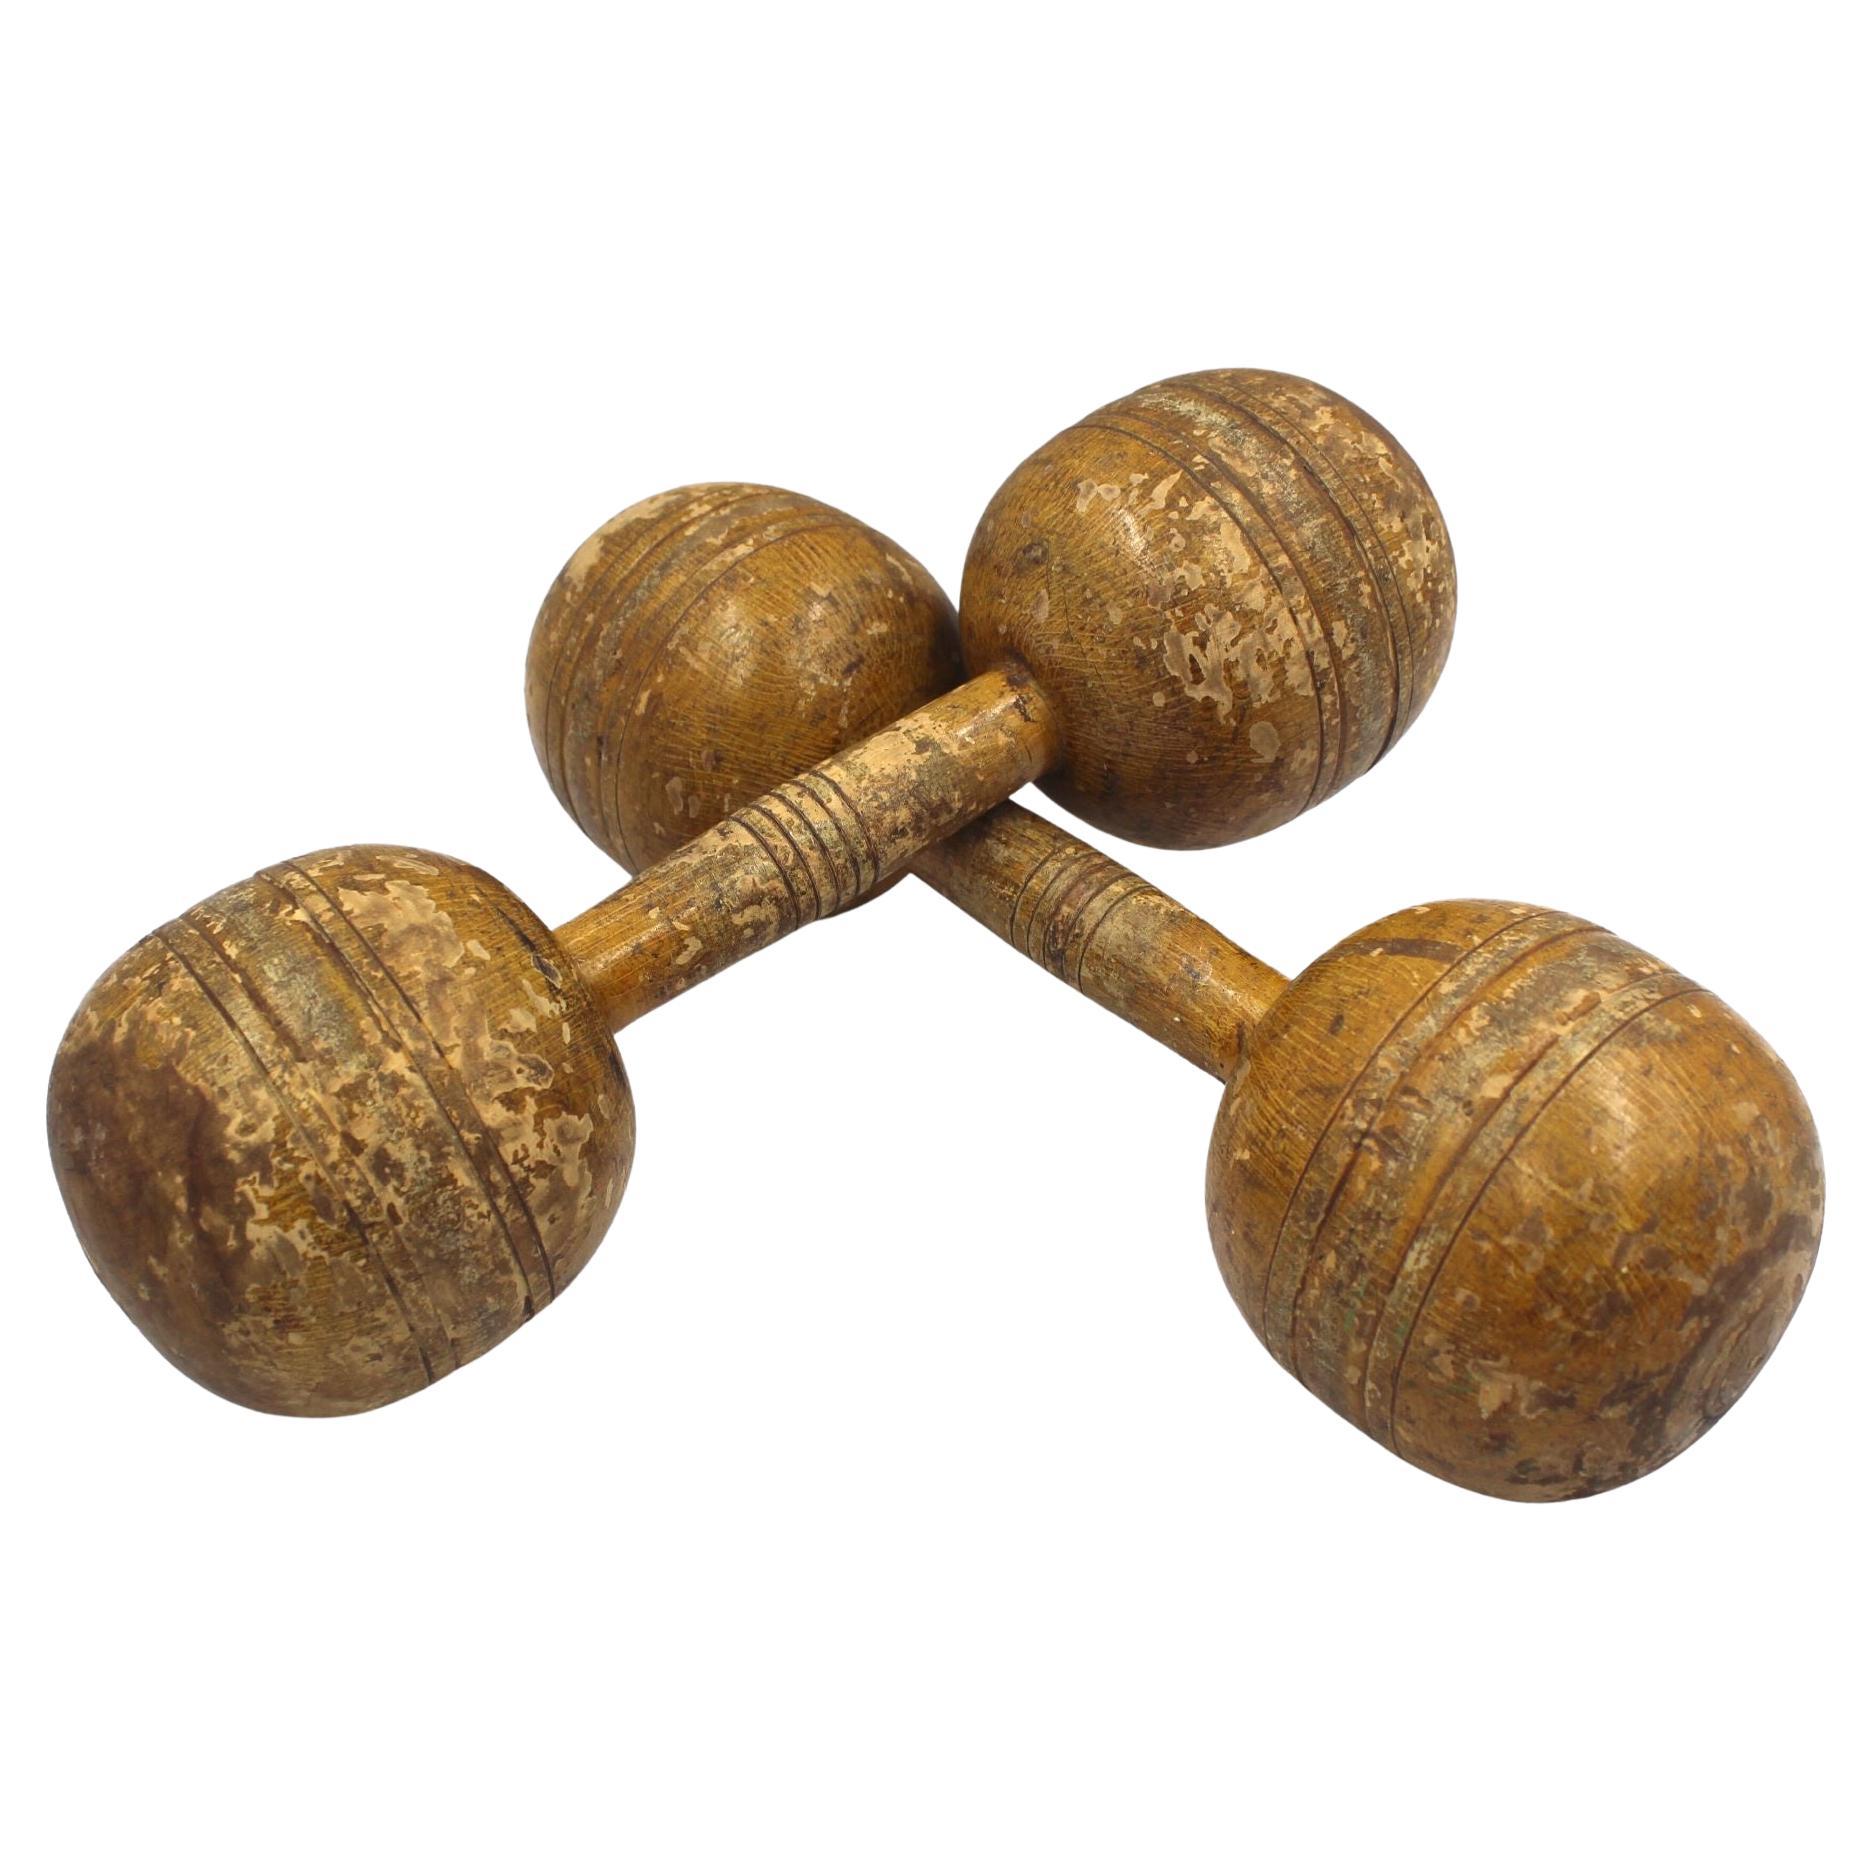 Presented is a set of vintage wooden dumbbells. The dumbbells are fixed-weight and constructed of hand-turned solid wood. They have incised lines at center for grip and around the balls for ornamentation and to keep the dumbbells from rolling. A